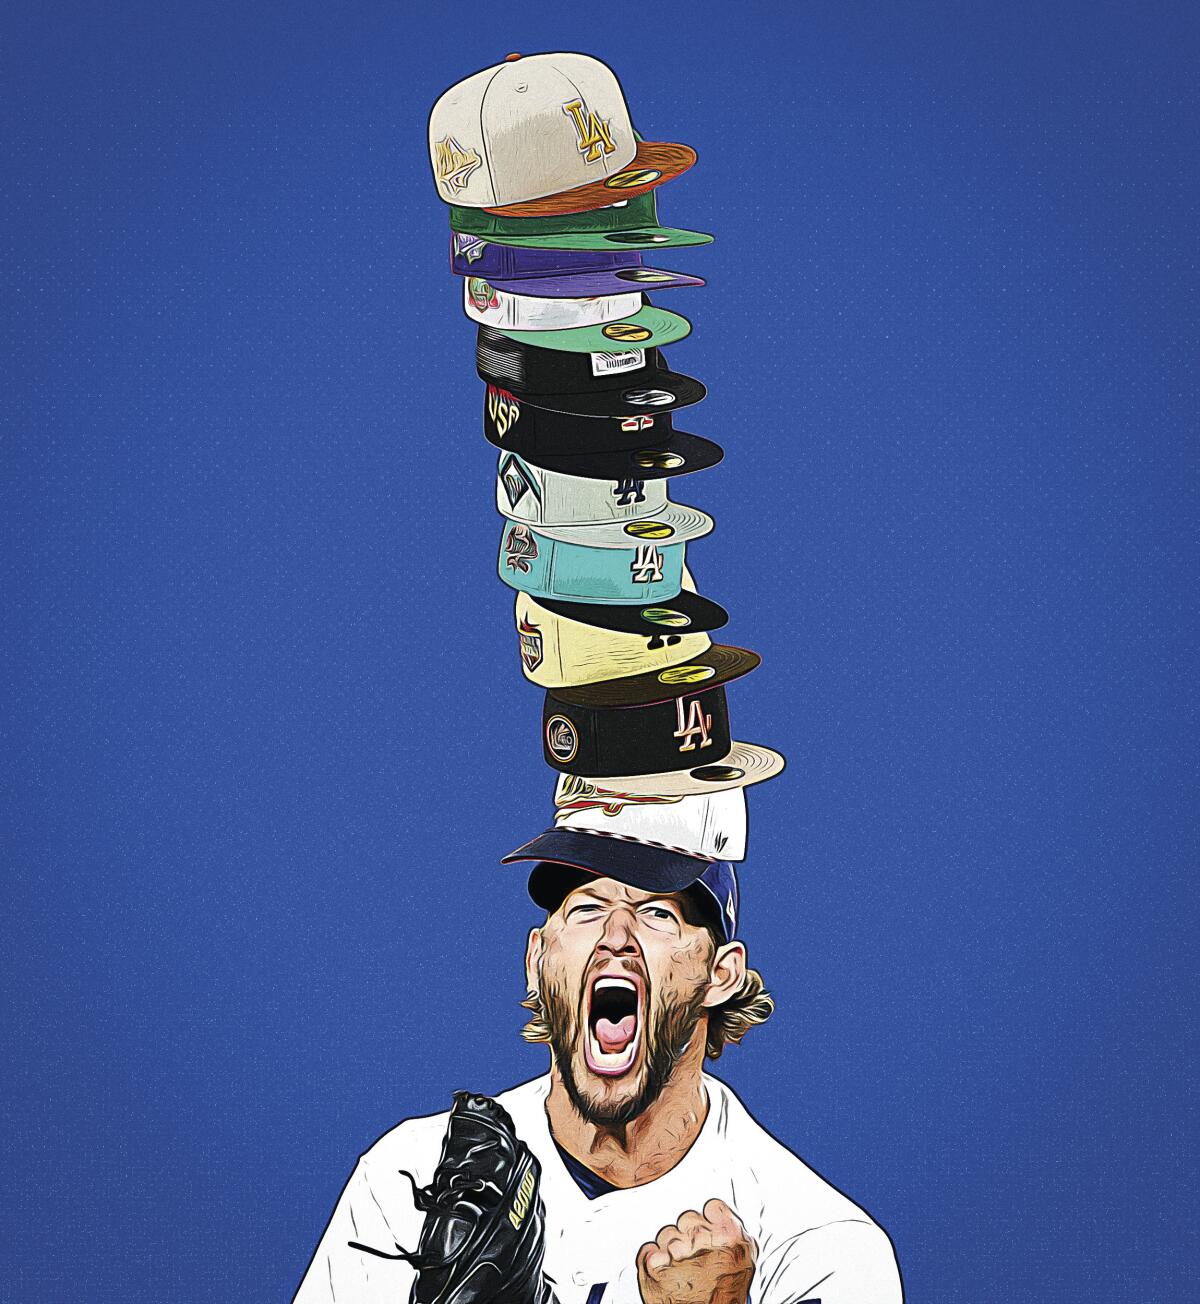 An illustration of Clayton Kershaw features multiple styles of Dodgers hats perched atop his head.